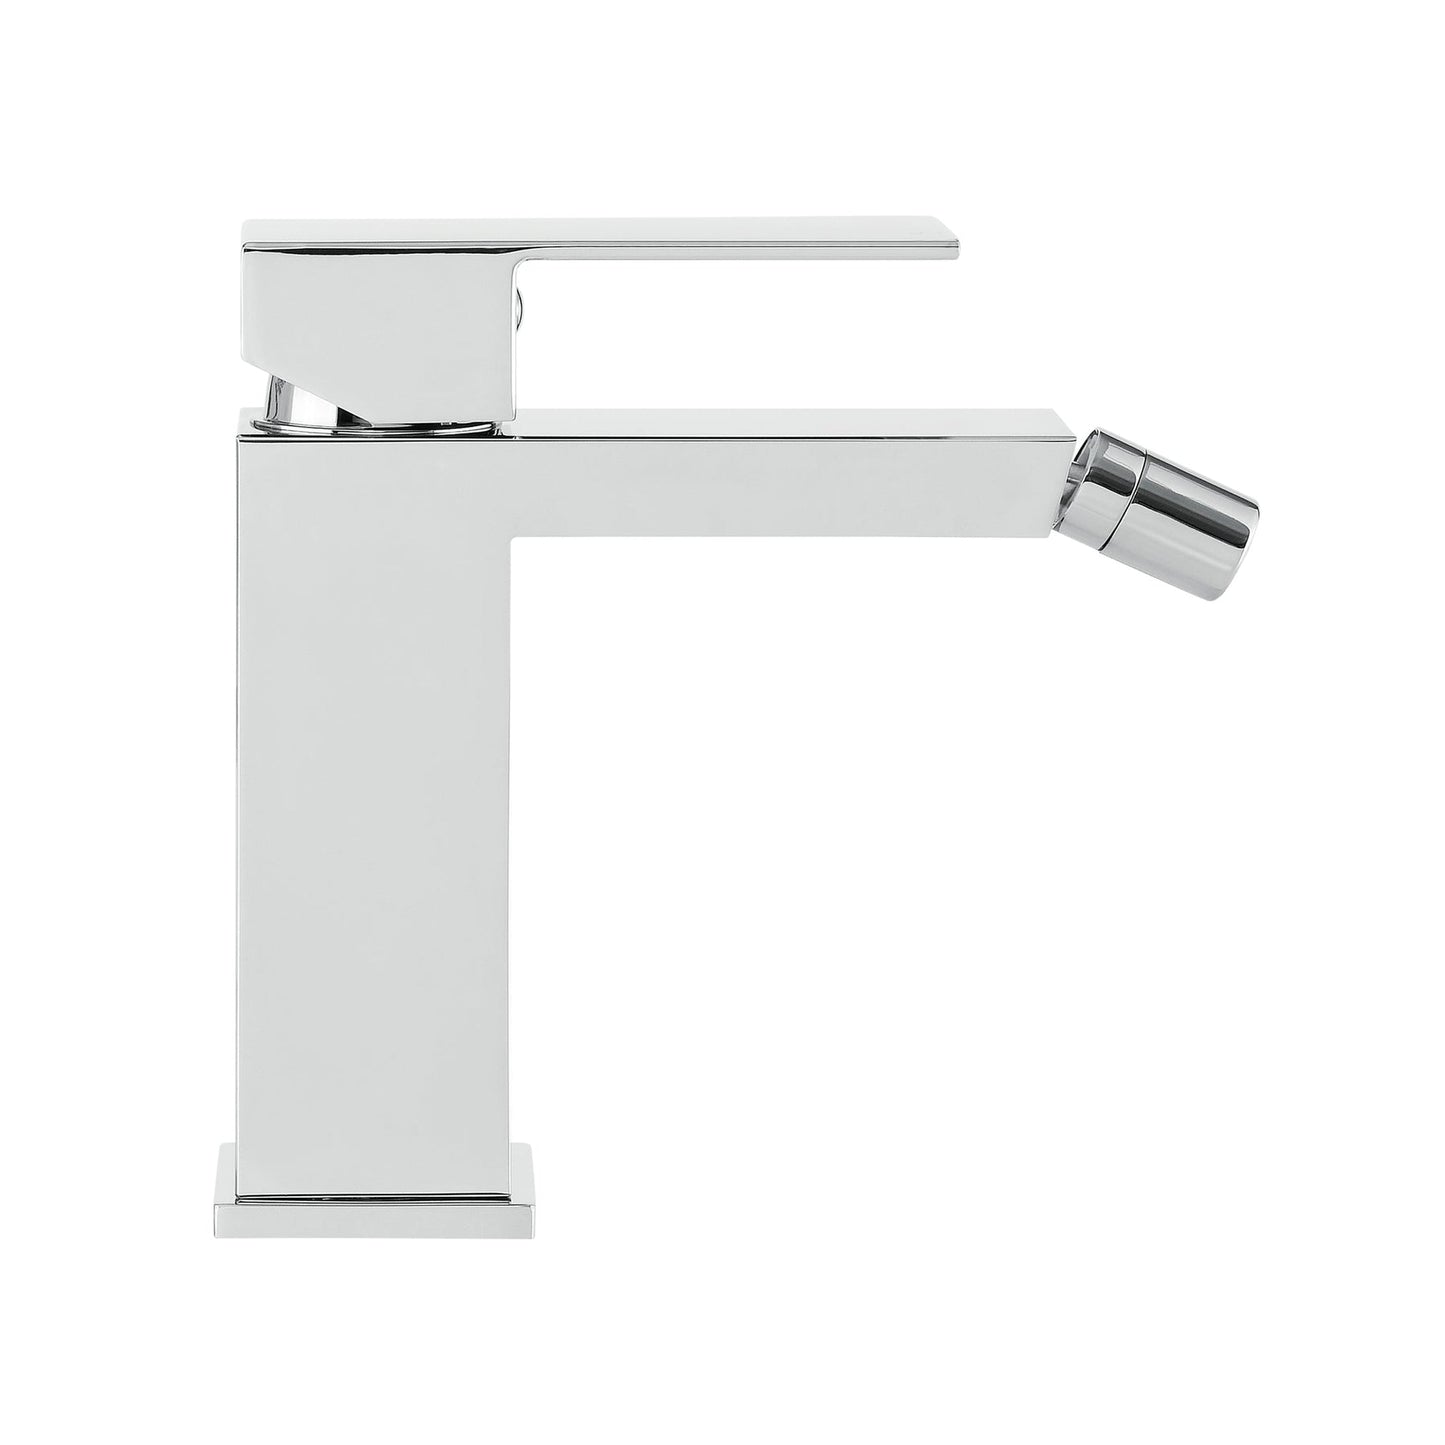 Swiss Madison Concorde 6" Chrome Single Hole Fixture Mounted Bidet Faucet With Flow Rate of 1.28 GPM